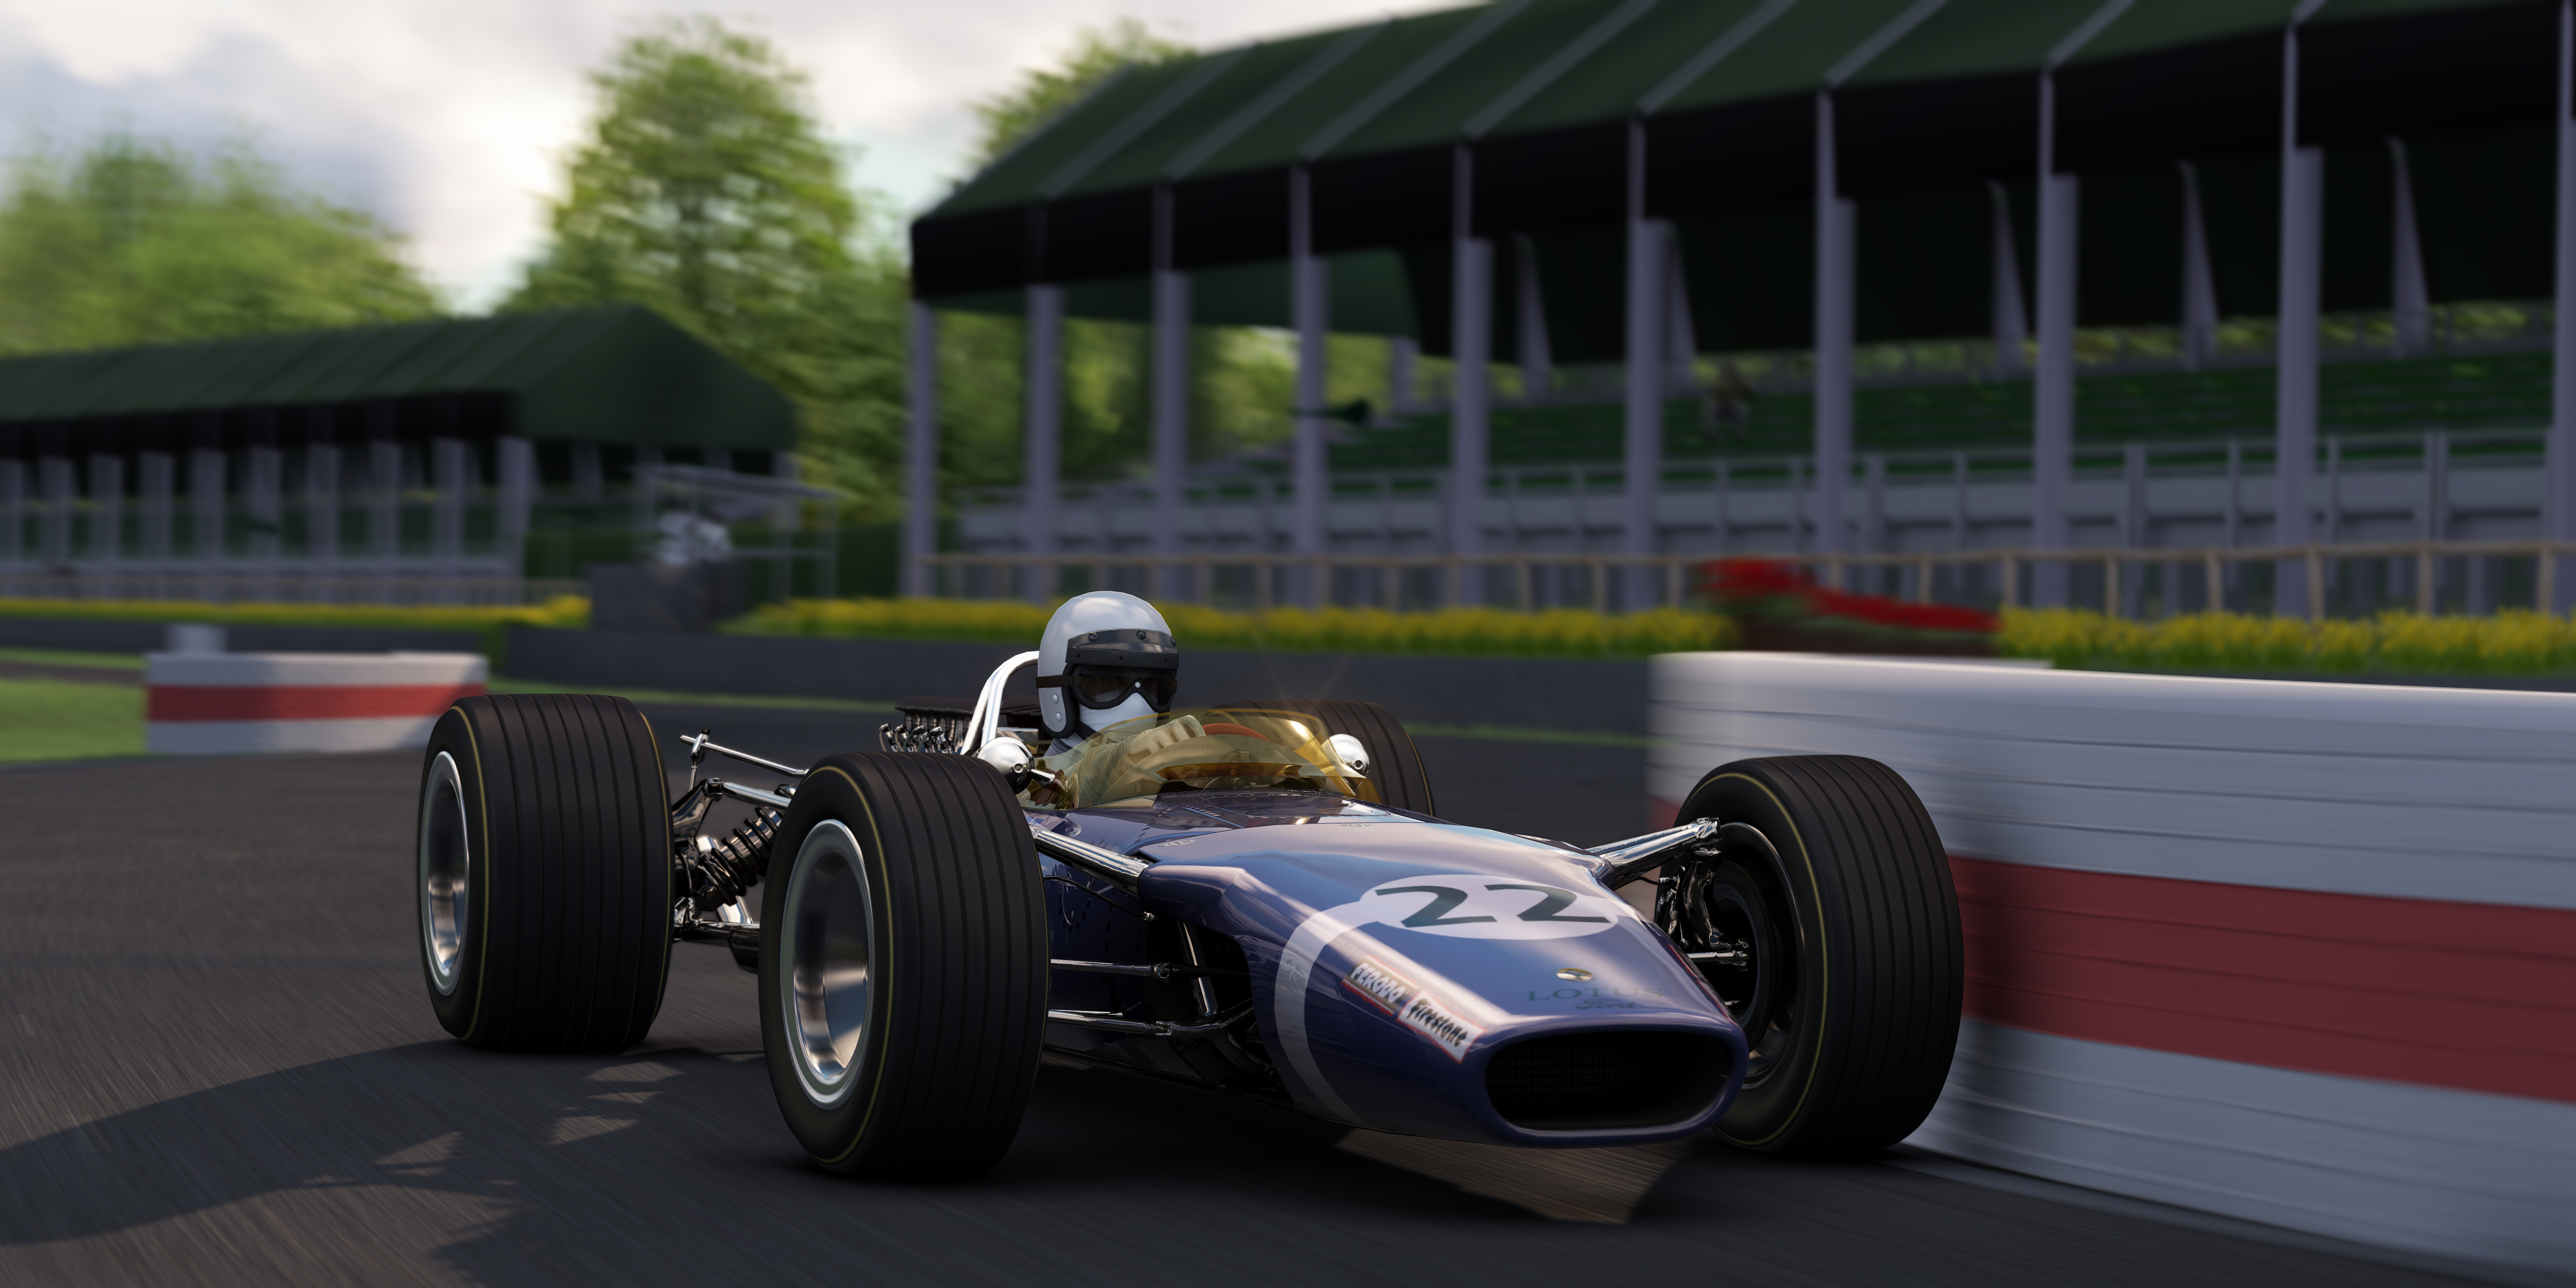 Racing Goodwood Festival Of Speed 1968 Lotus 49 Assetto Corsa Video Games Vehicle 5760x2880